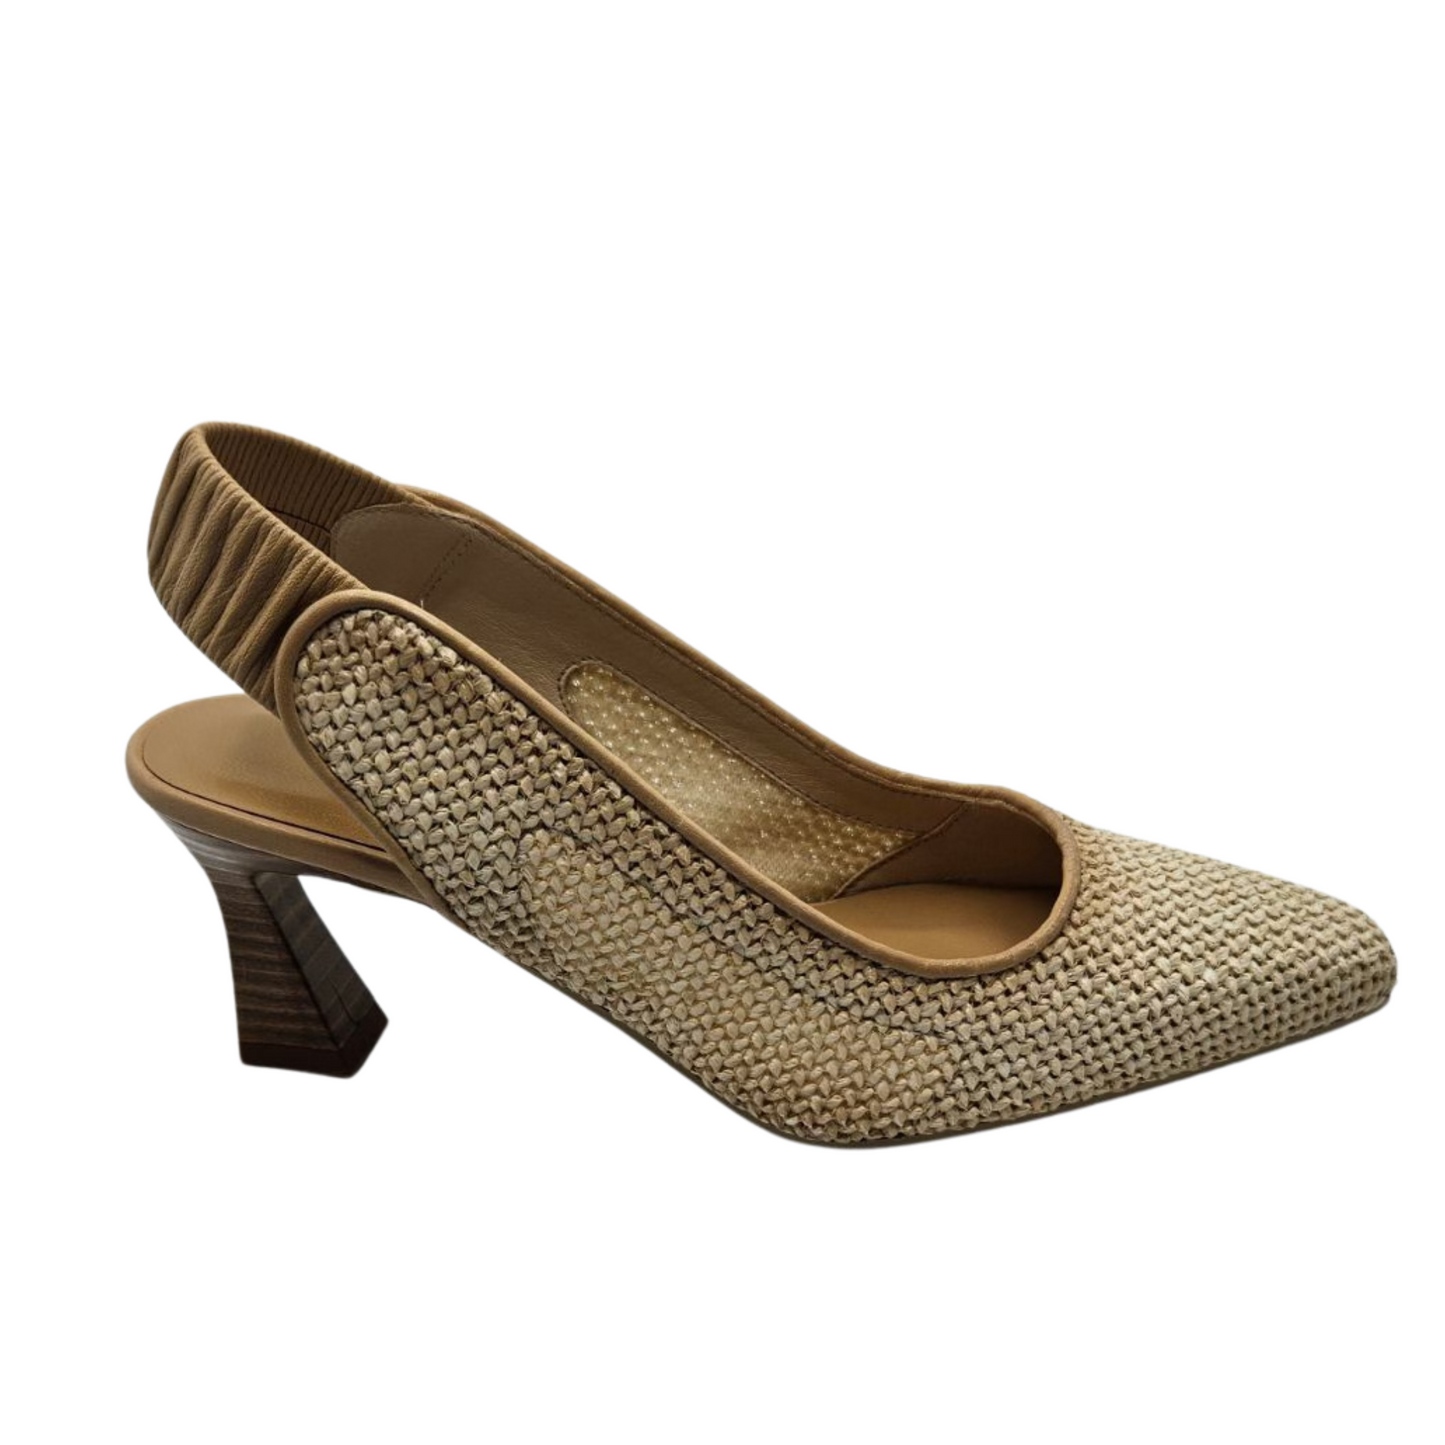 Right facing view of cream coloured woven pump with flared heel and elastic slingback strap